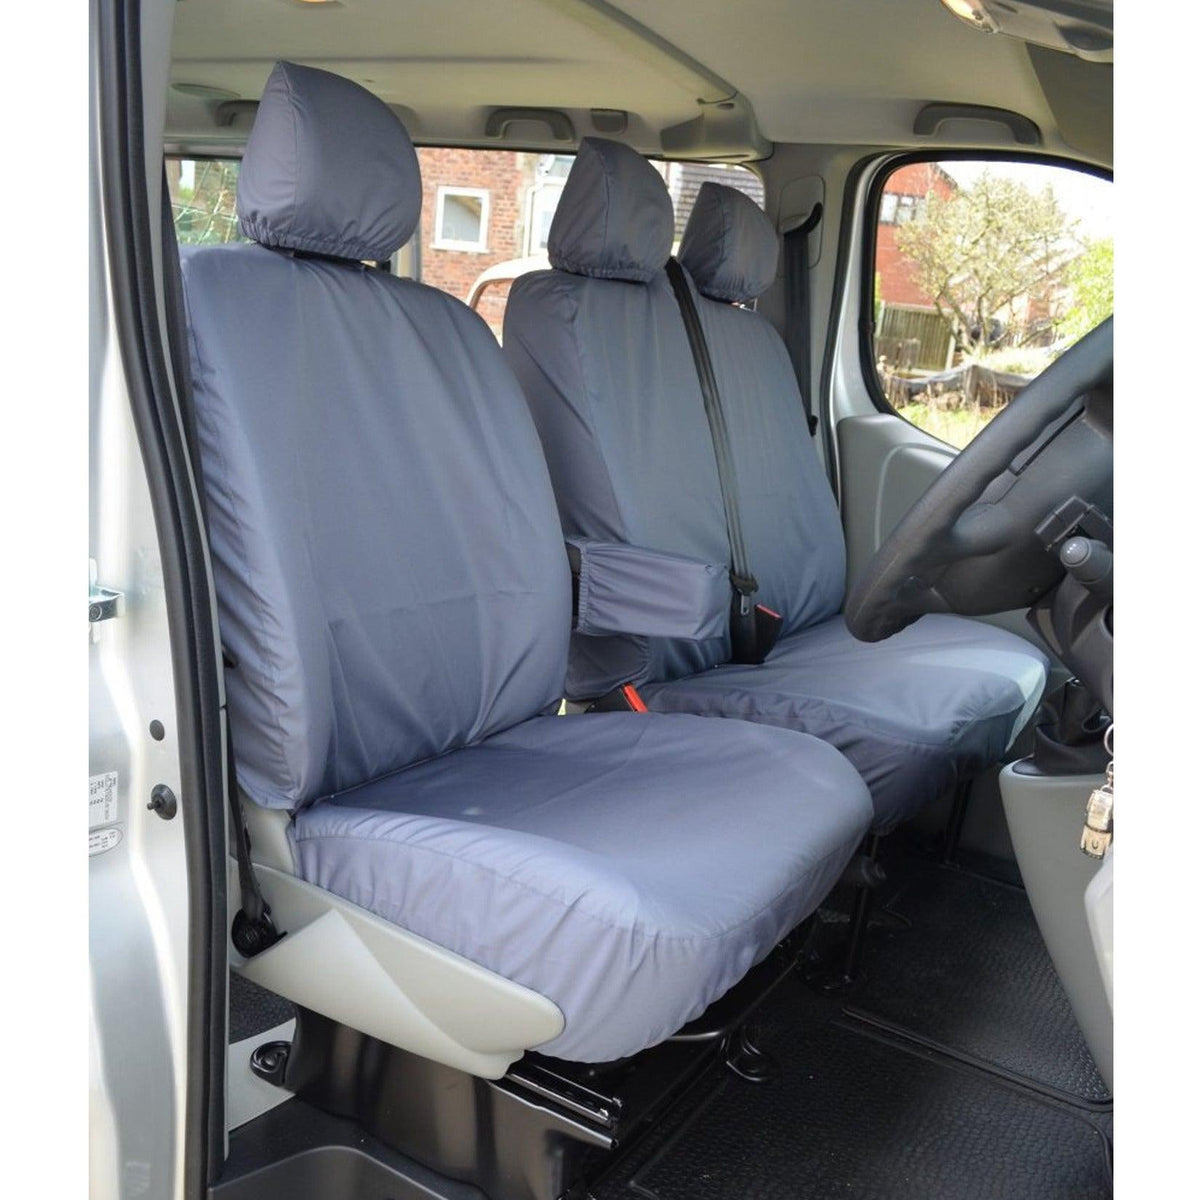 RENAULT TRAFIC 2006-2014 DRIVER (WITH ARMREST) DOUBLE PASSENGER SEAT COVERS - GREY - Storm Xccessories2